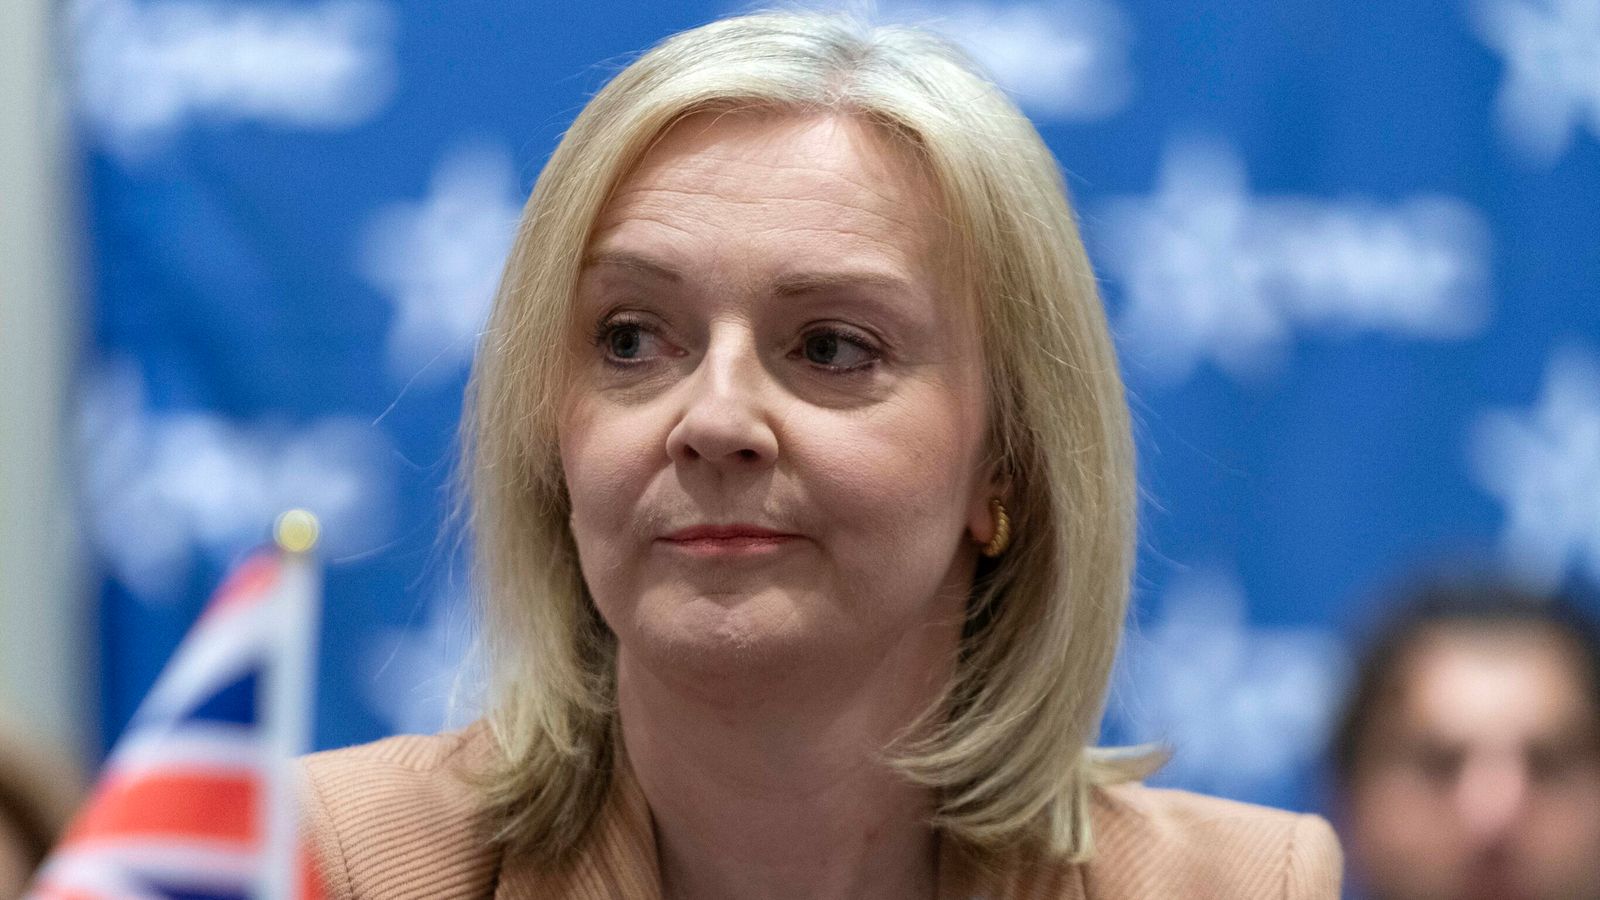 Liz Truss refuses to apologise for sparking mortgage rate rise - but admits one failing as PM